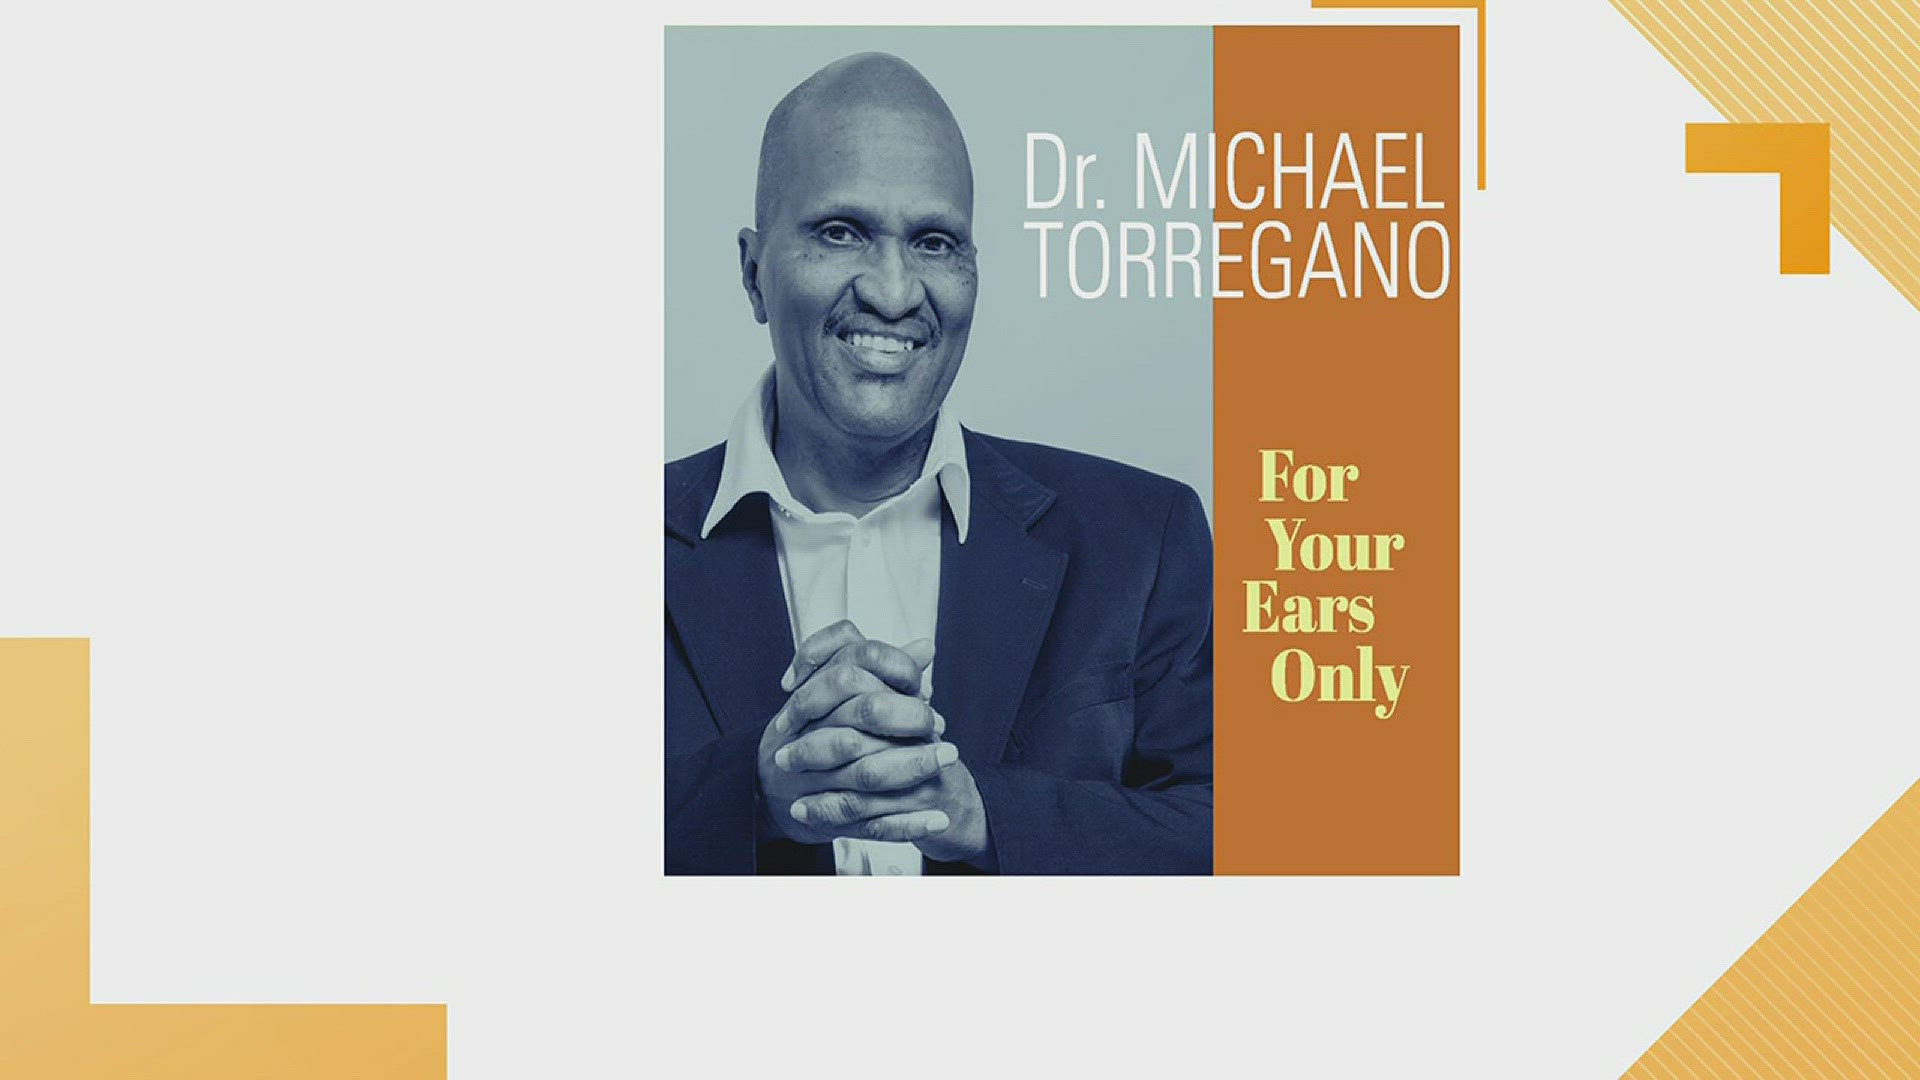 Doctor Michael Torregano is promoting his new album "For Your Ears Only"